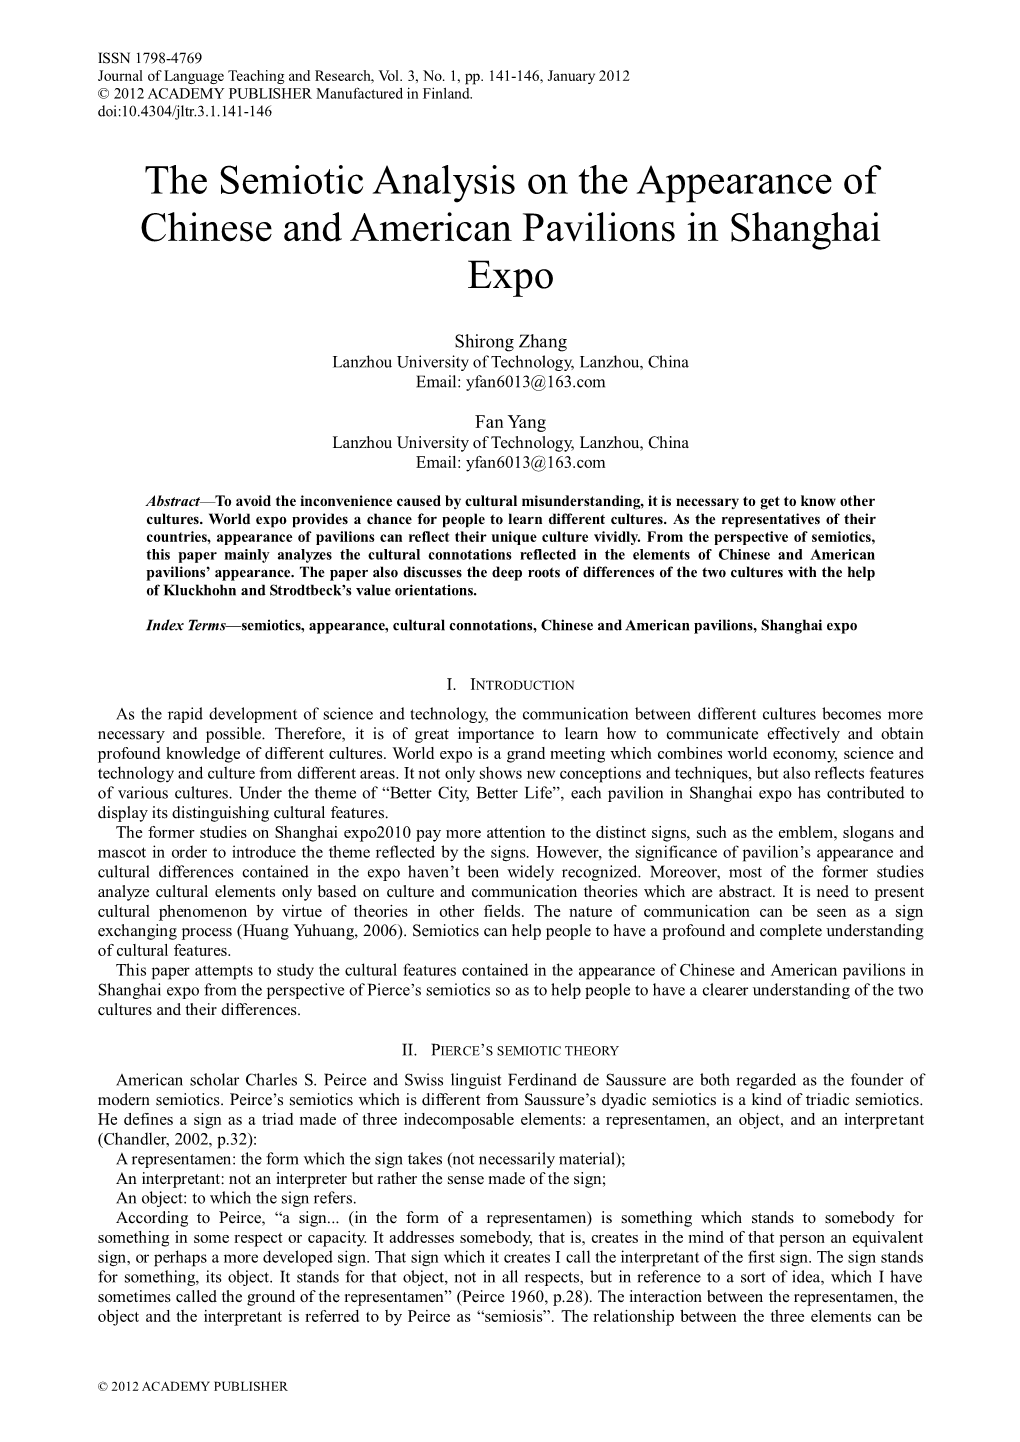 The Semiotic Analysis of the Cultural Elements in the Chinese Pavilion Of